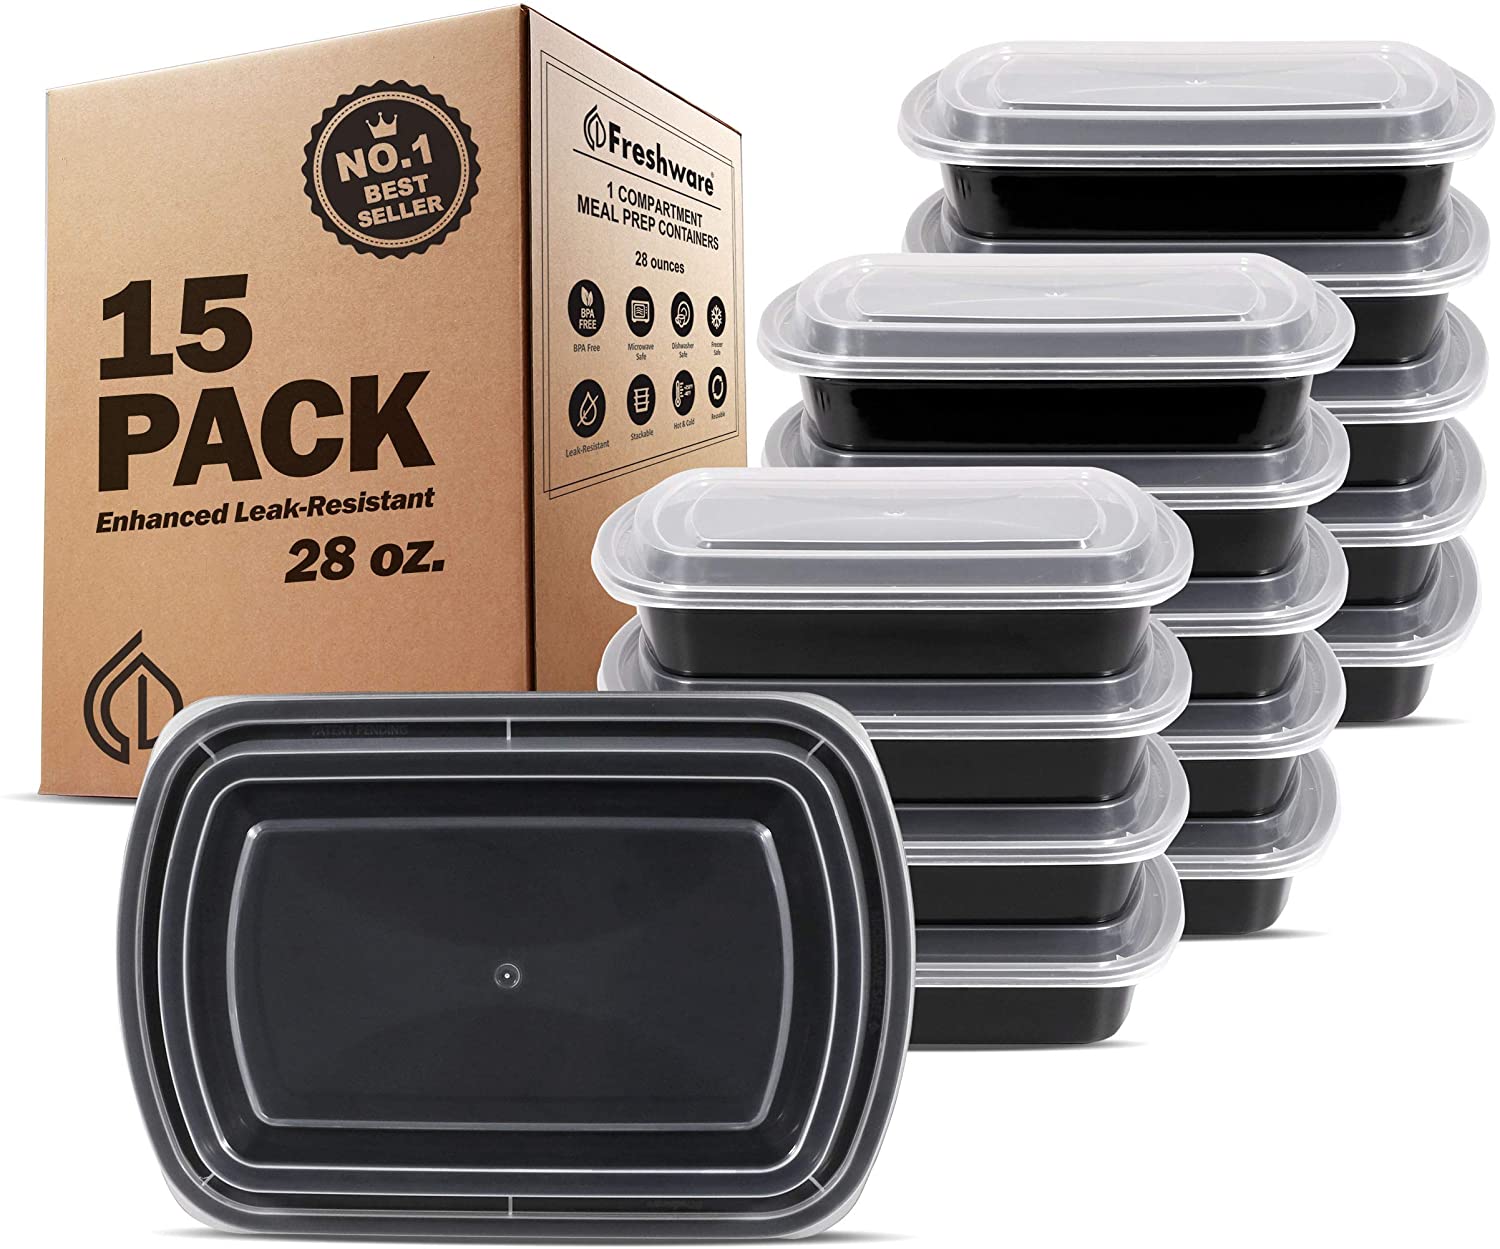 10-50pc Microwavable Meal Prep Container Plastic Food Storage Reusable Lunch Box 